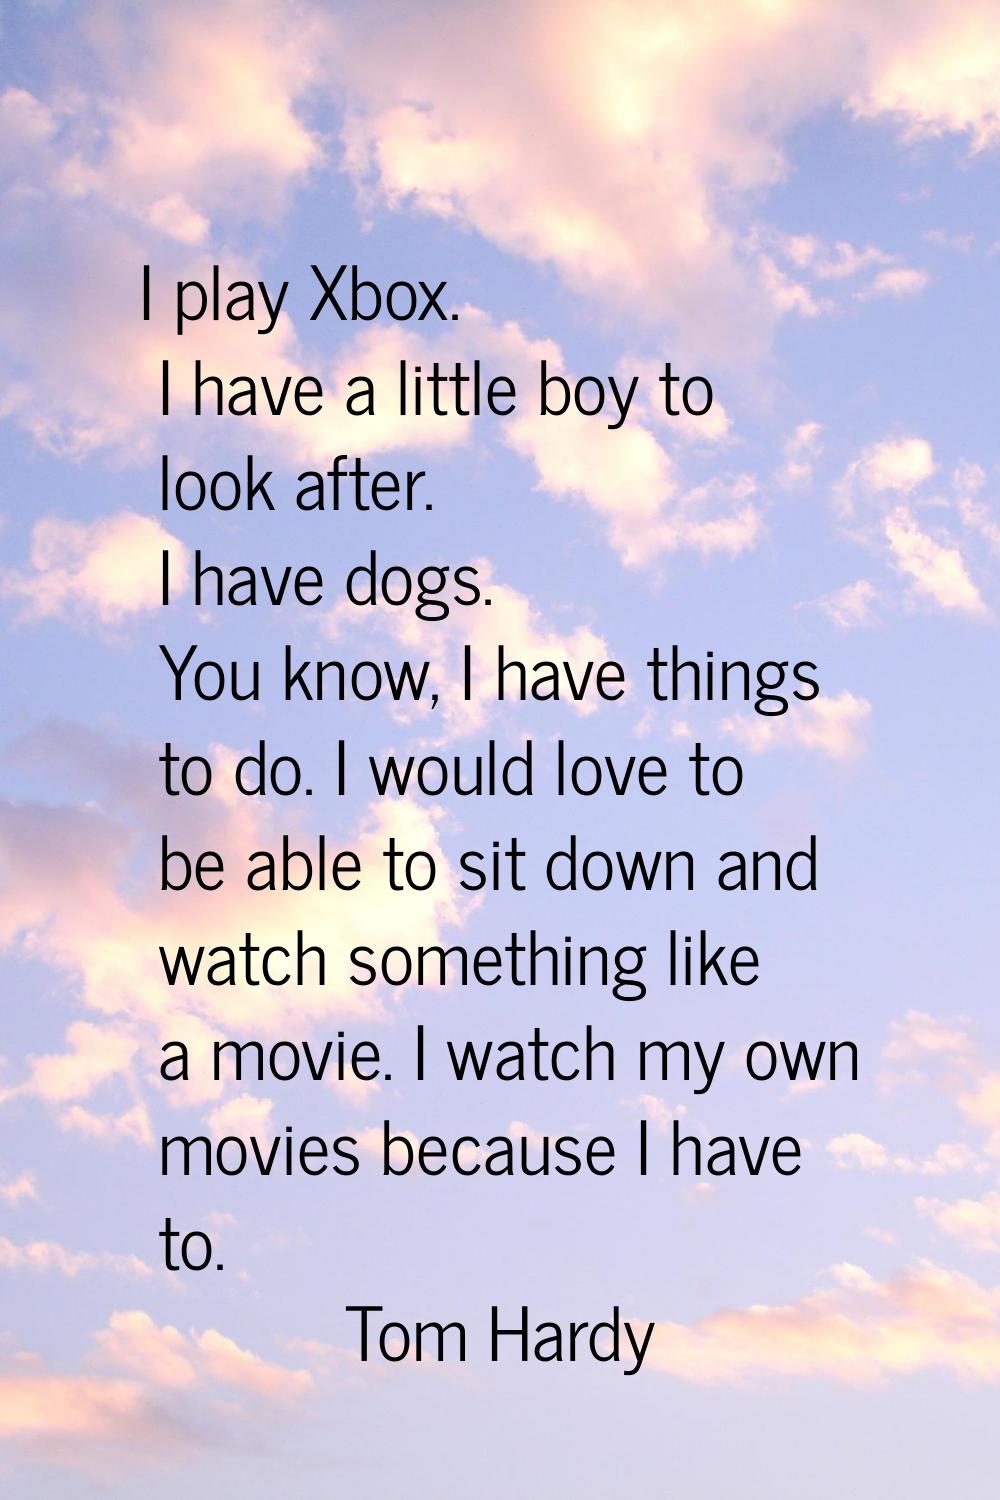 I play Xbox. I have a little boy to look after. I have dogs. You know, I have things to do. I would